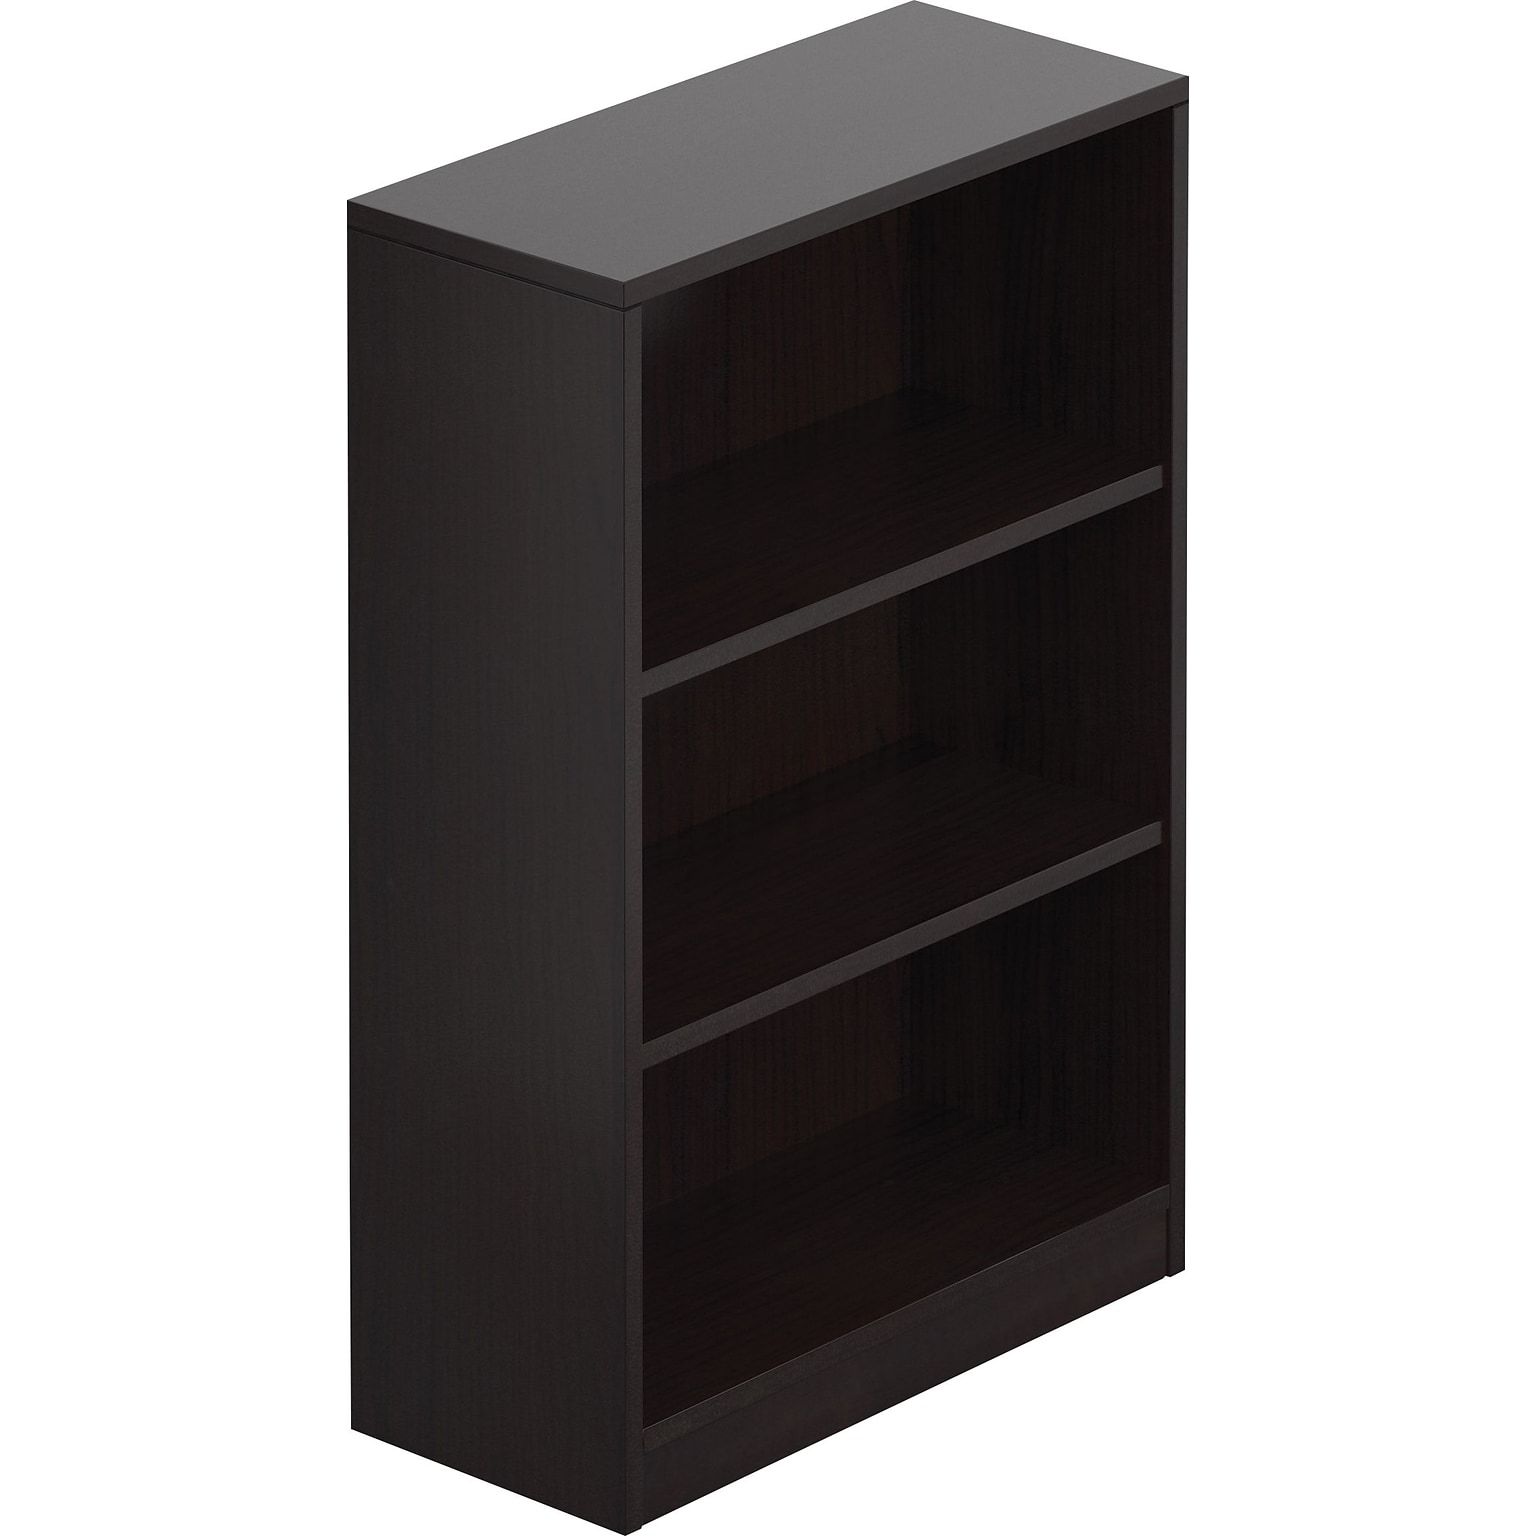 Offices to Go Superior Laminate 48H 2-Shelf Bookcase with Adjustable Shelves, American Espresso (TDSL48BC-AEL)